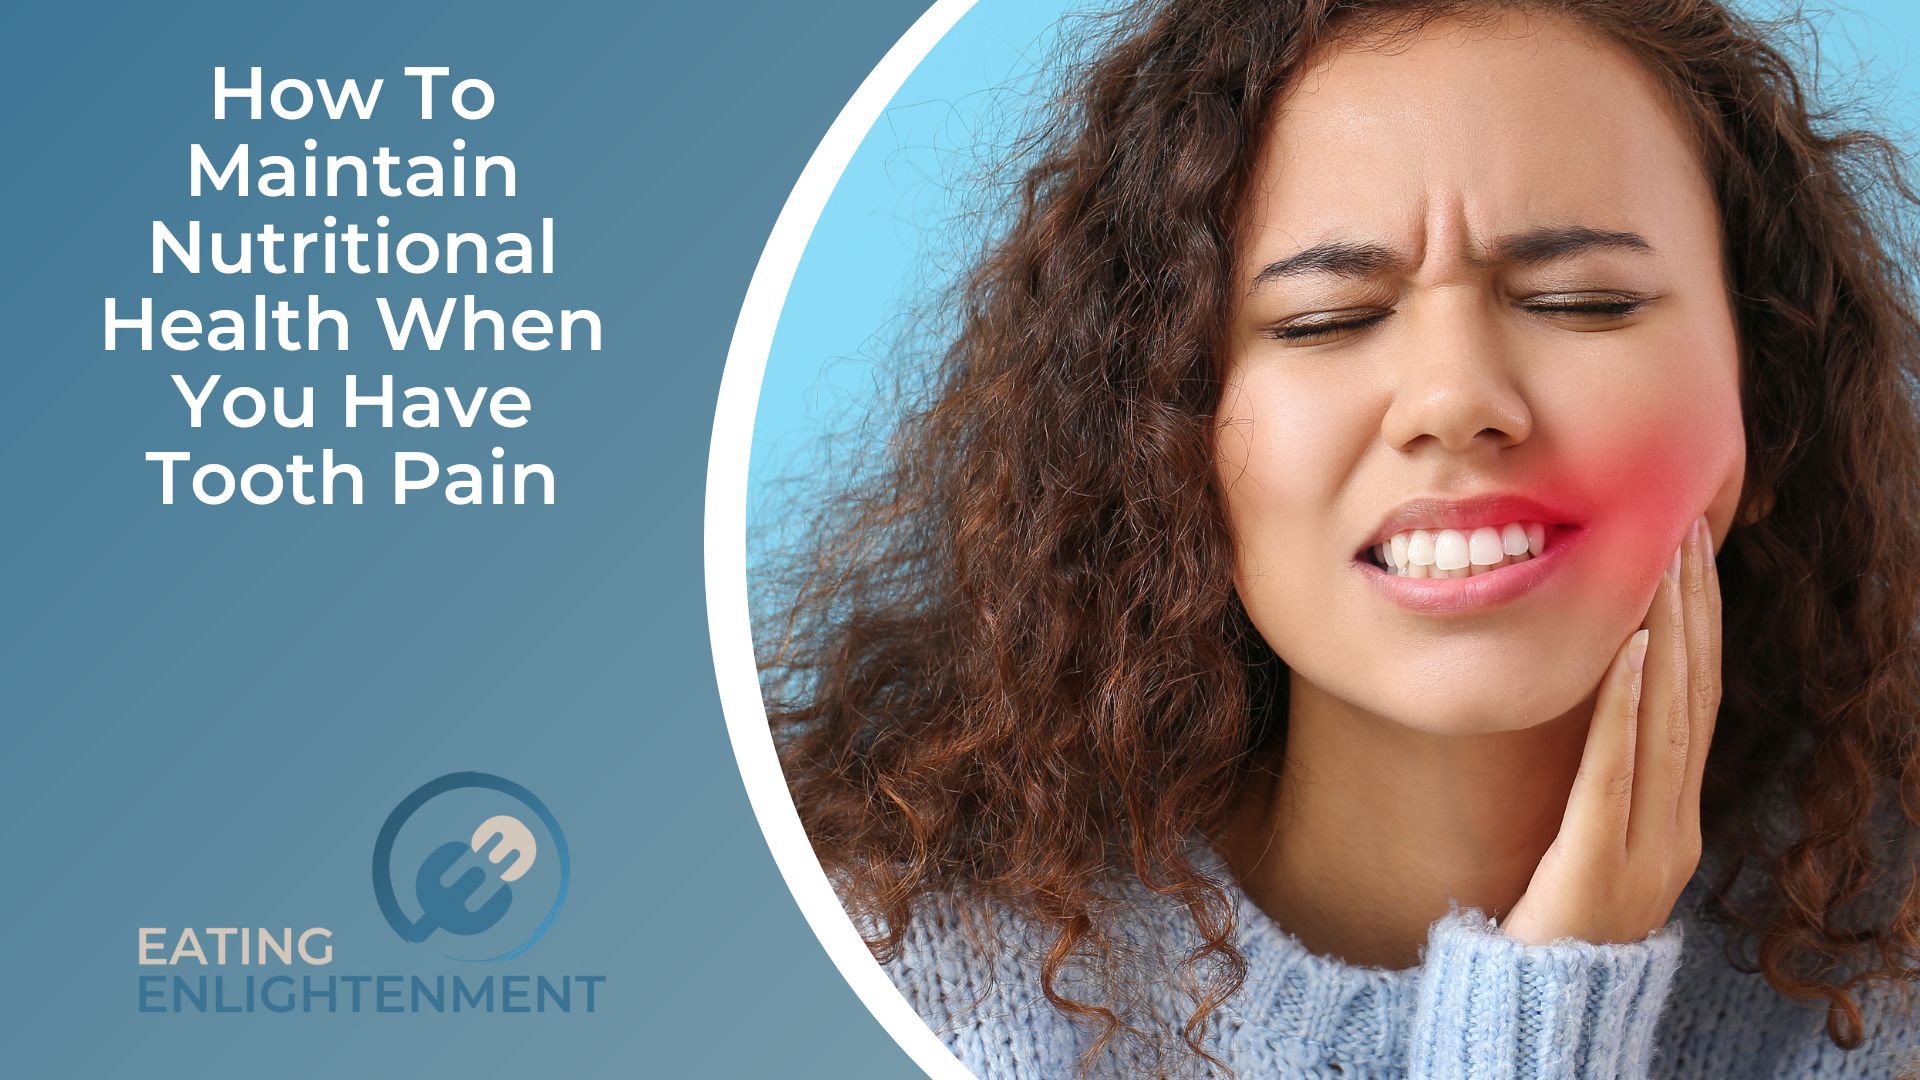 How To Maintain Nutritional Health When You Have Tooth Pain